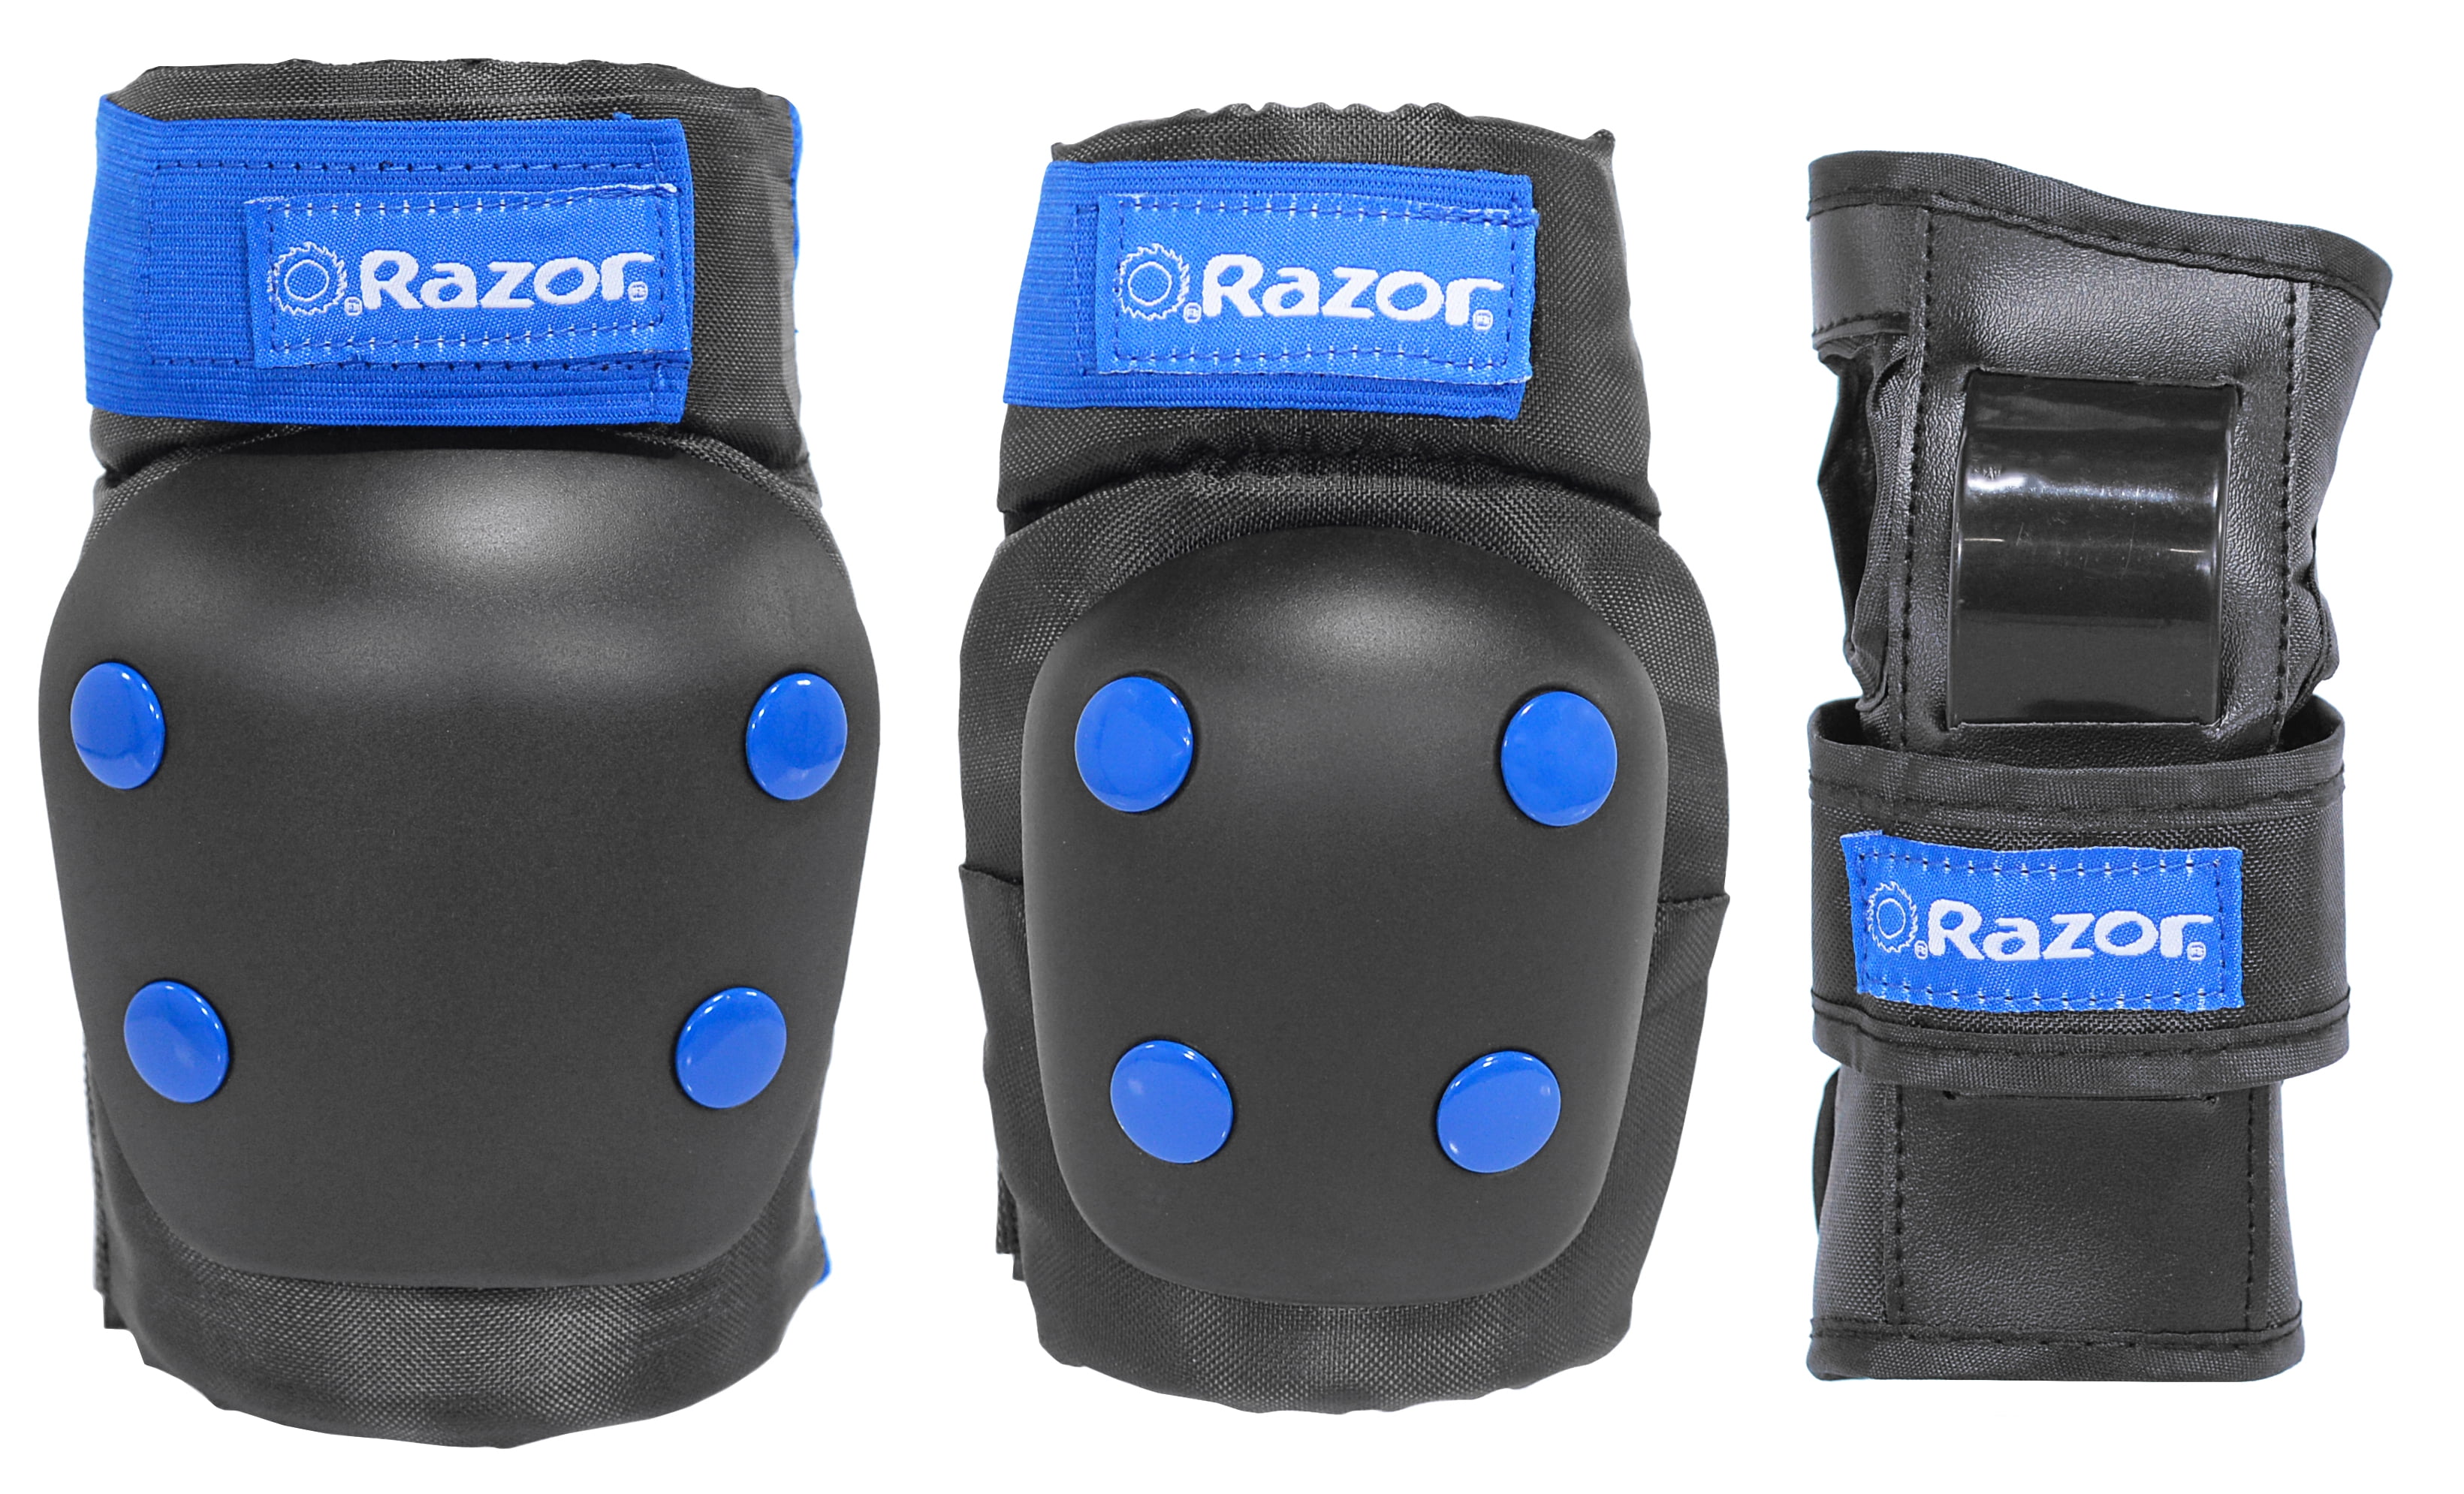 ages MODEL 96748 Razor Jr Multi Sport Kids Elbow and Knee pads 3 